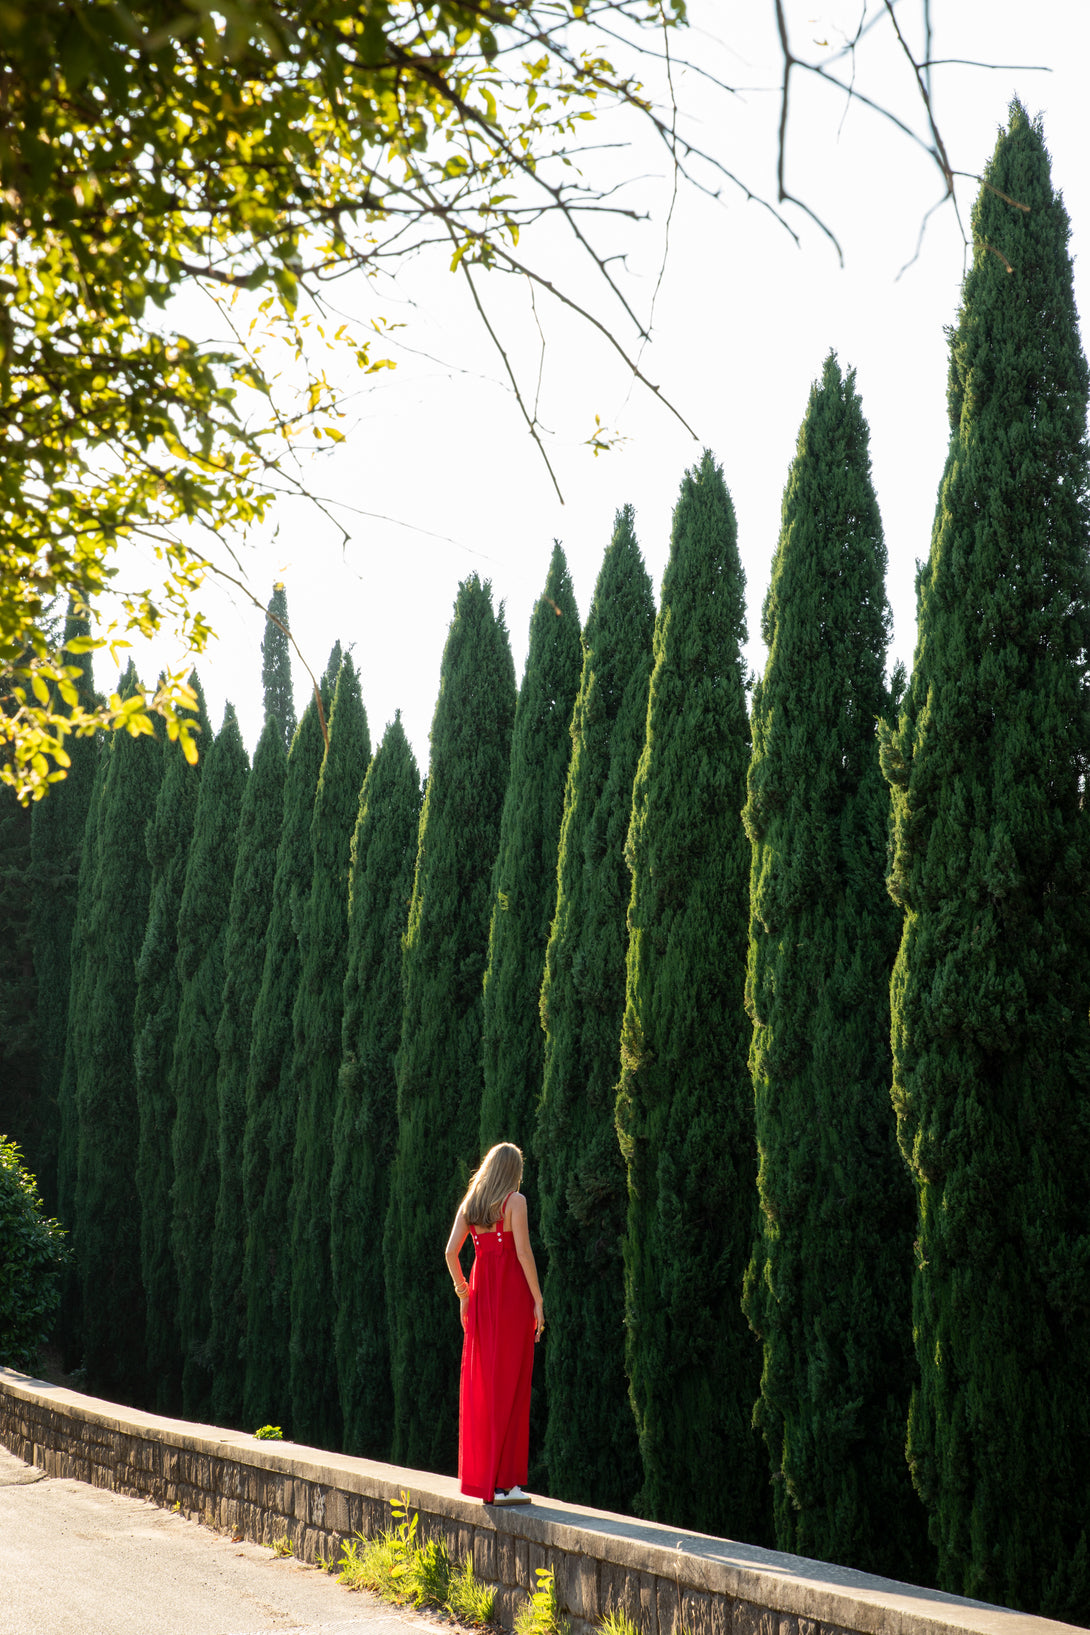 Carolina standing by cypress trees in the hills above Florence.